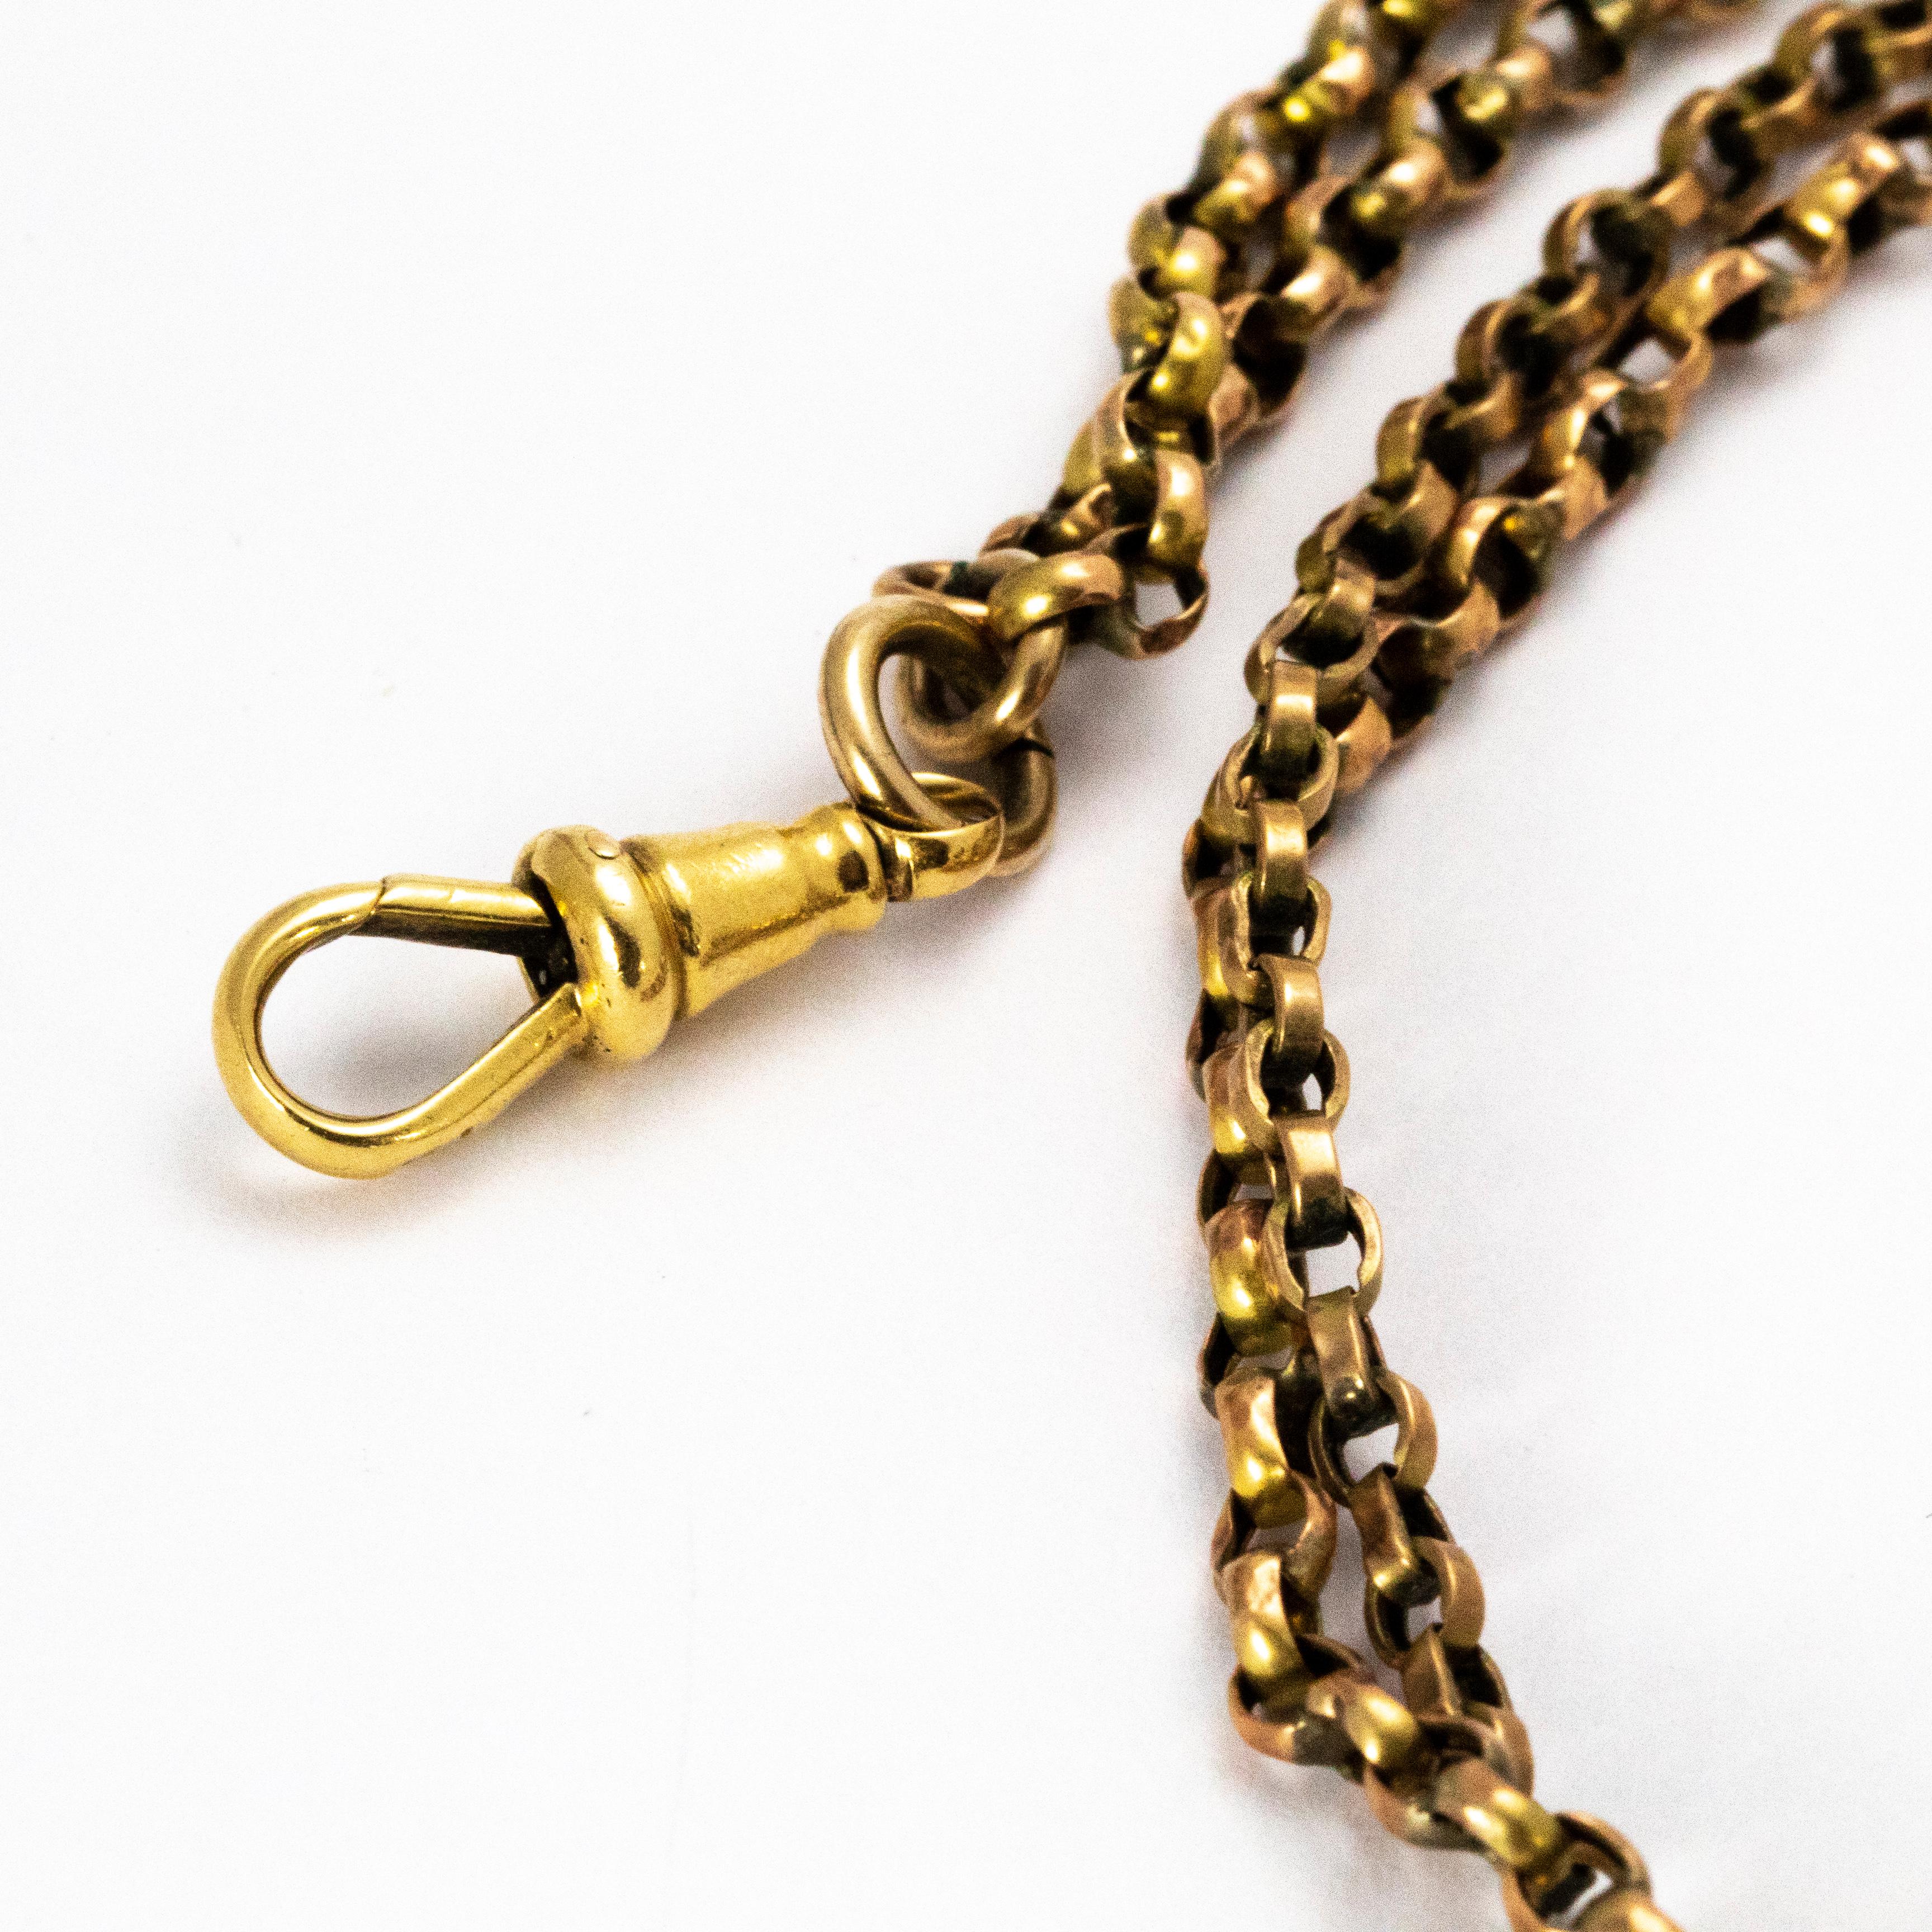 A brilliant Edwardian chain necklace with a dog clip fastening, modelling in 9 karat yellow gold. The chain has a great wearable length of 42 cm.